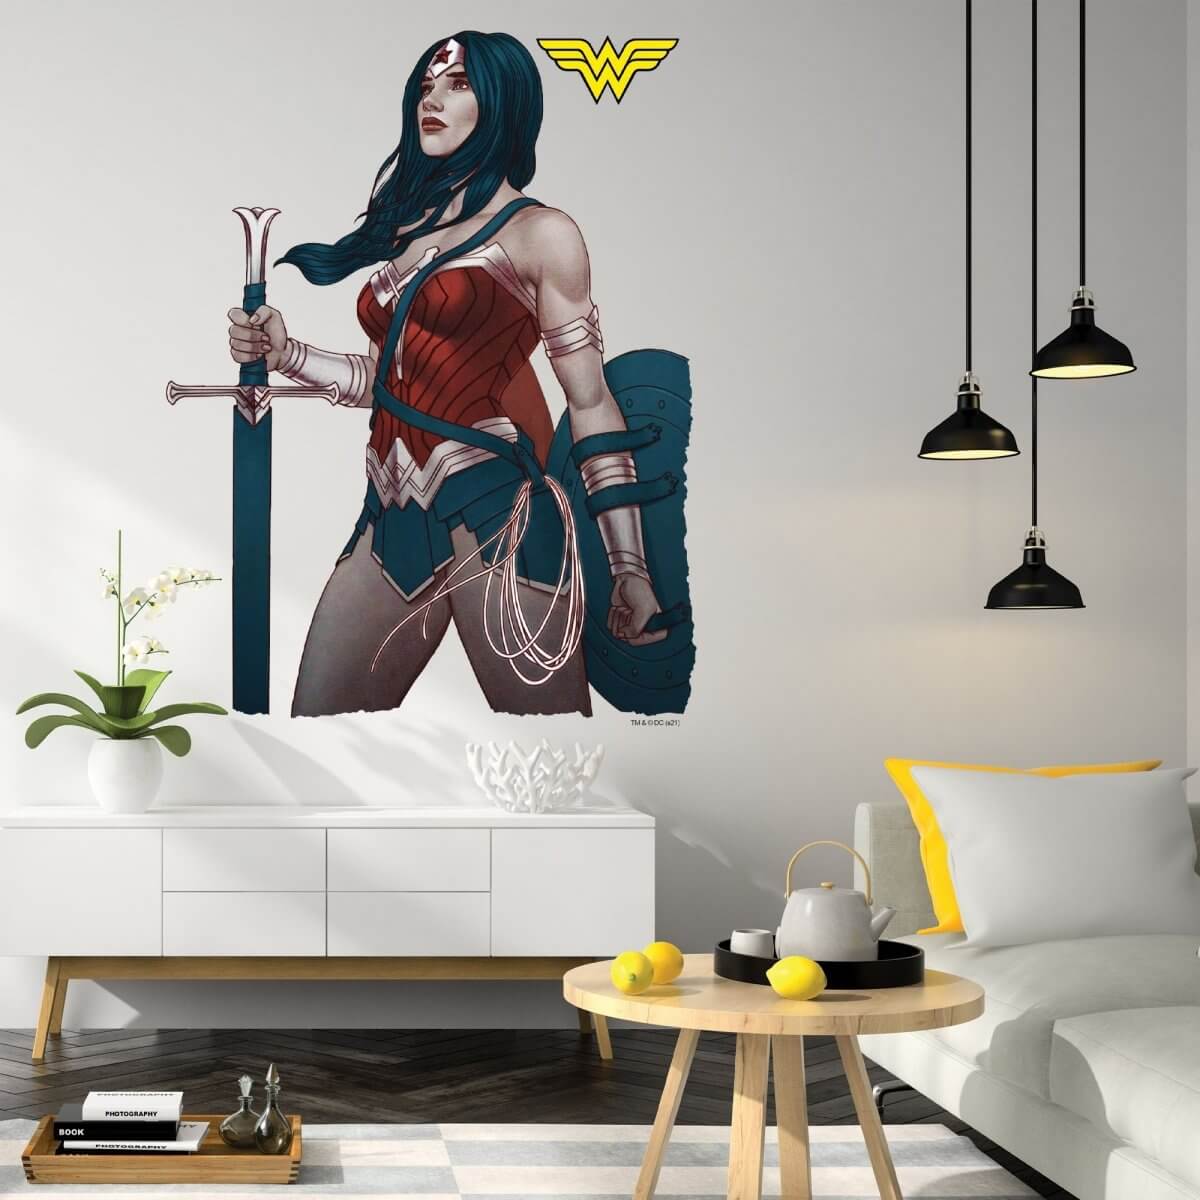 Kismet Decals Wonder Woman #30 Var. Comic Cover Series Officially Licensed Wall Sticker - Easy DIY DC Comics Home, Kids or Adult Bedroom, Office, Living Room Decor Wall Art - Kismet Decals